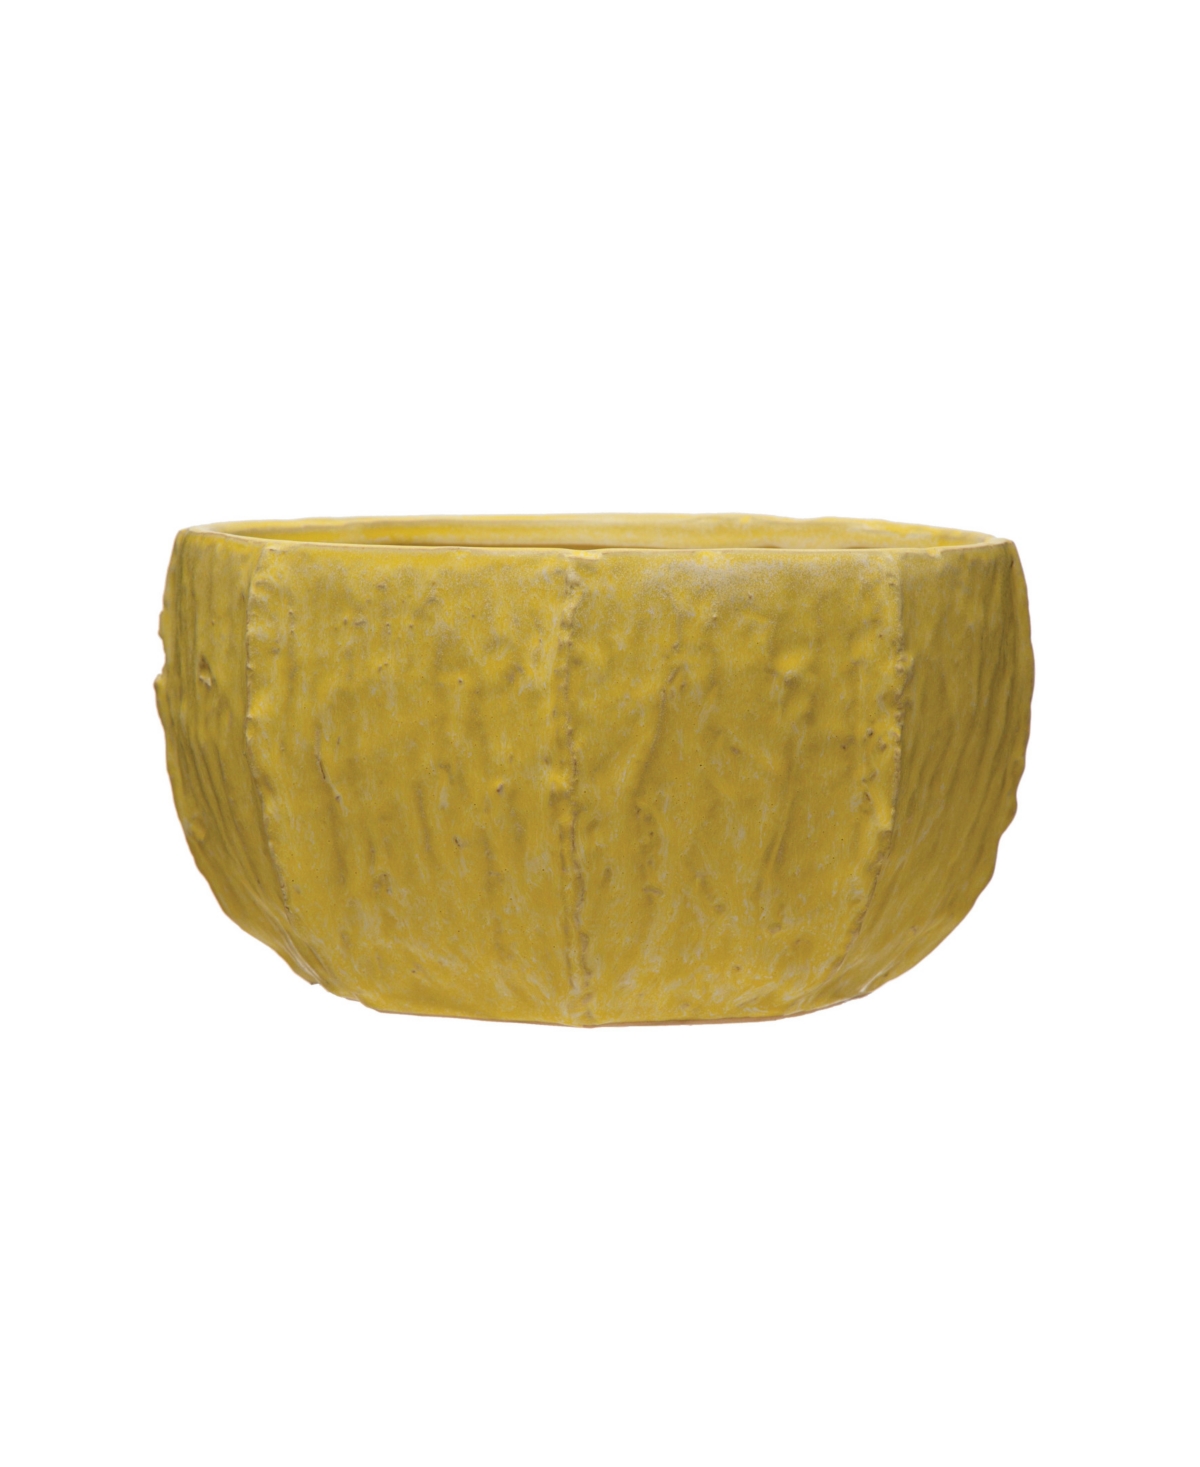 Stoneware Planter with Organically Shaped Detail - Yellow